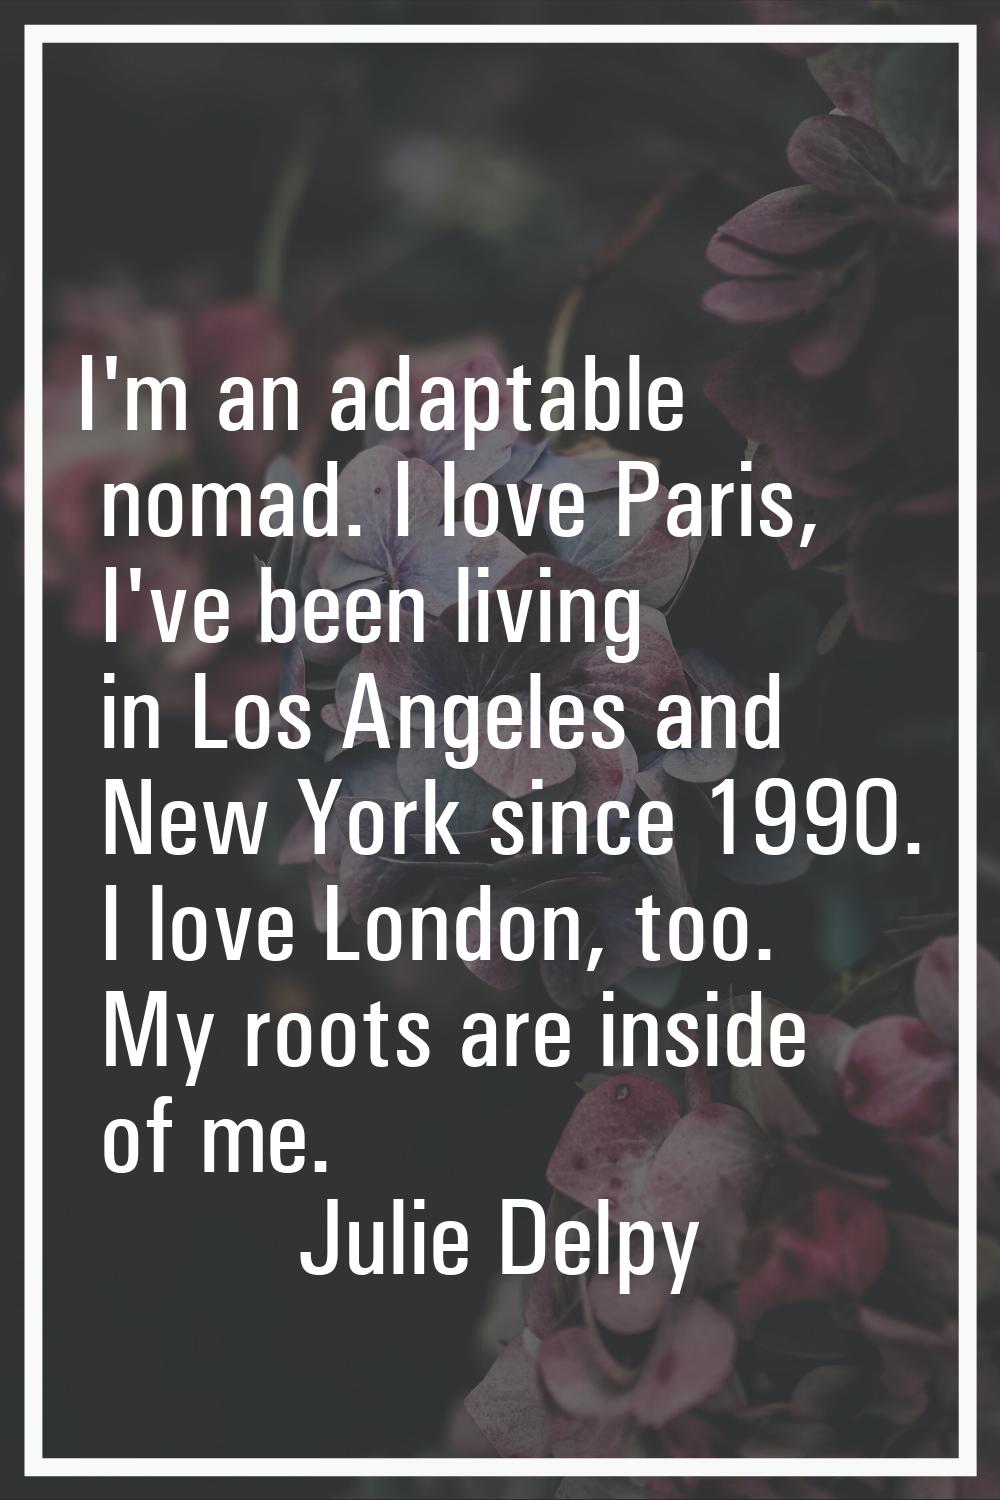 I'm an adaptable nomad. I love Paris, I've been living in Los Angeles and New York since 1990. I lo